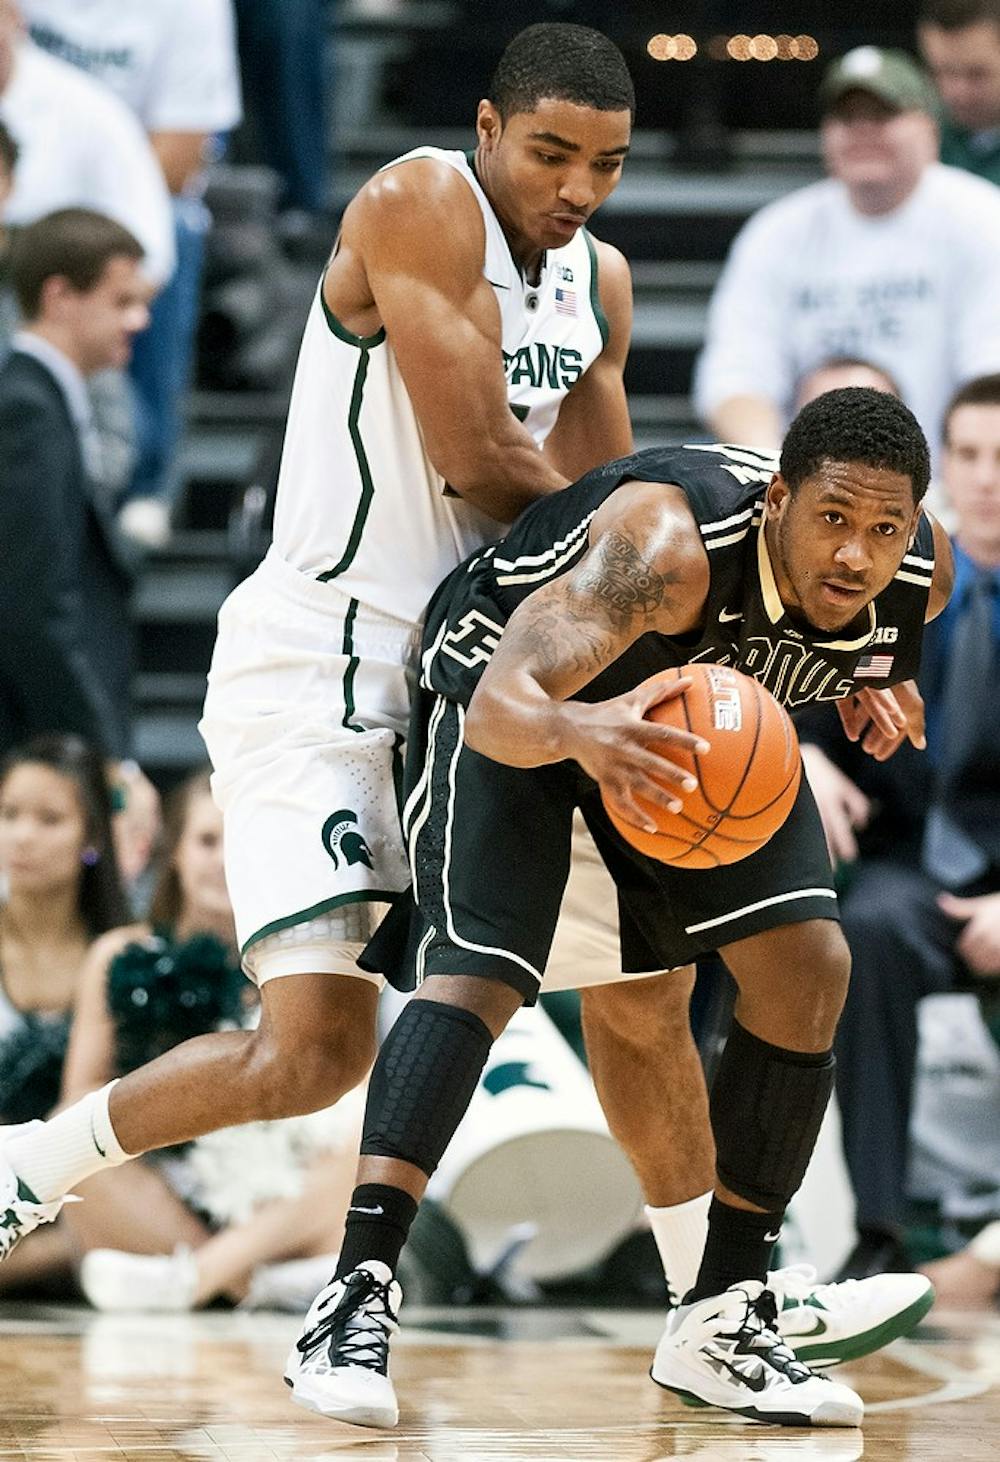 	<p>Freshman guard Gary Harris plays defense on Purdue guard Terone Johnson on Saturday, Jan. 5, 2012, at Breslin Center. <span class="caps">MSU</span> defeated Purdue 84-61 during the Spartans&#8217; Big Ten home opener. Adam Toolin/The State News</p>